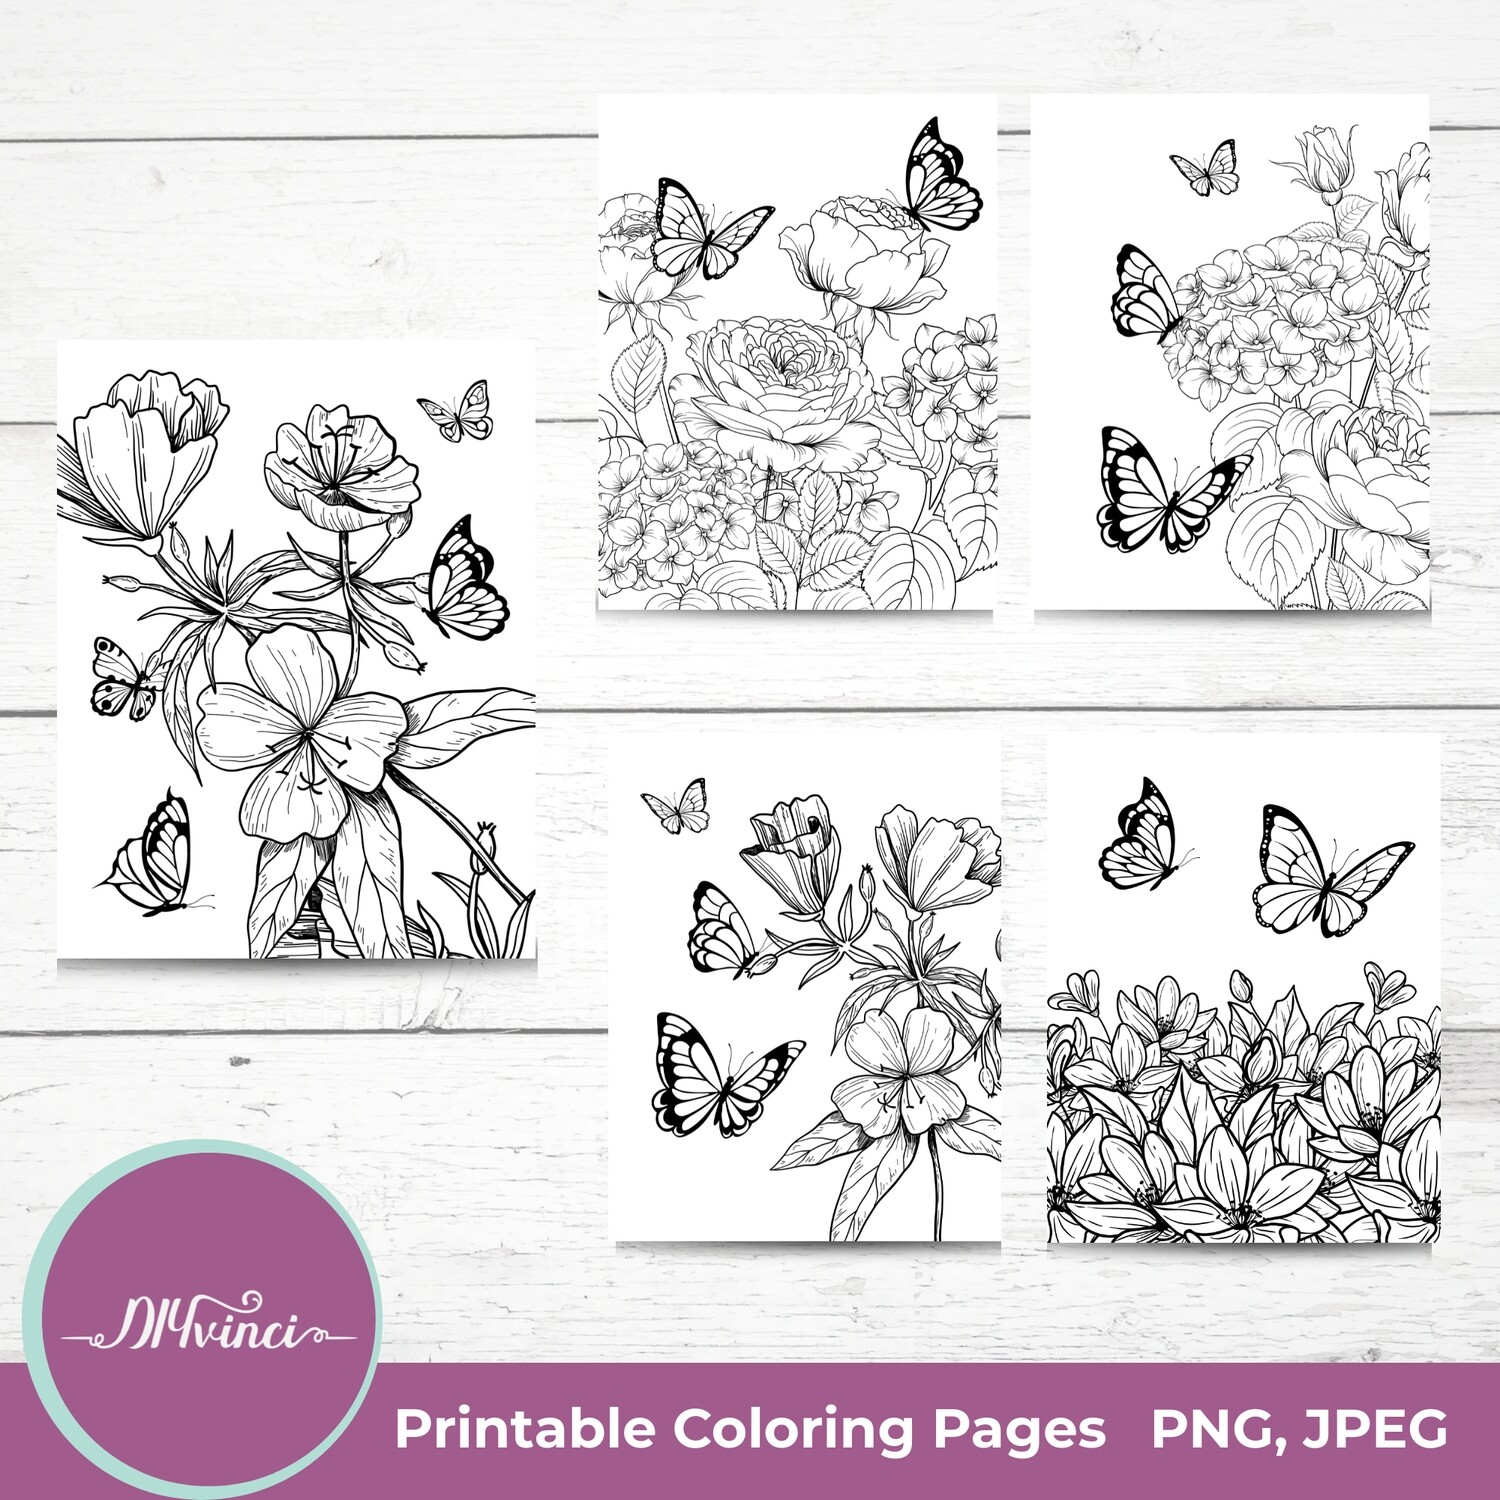 5 Butterfly and Flower Printable Coloring Pages - JPEG & PNG - Personal and Commercial Use